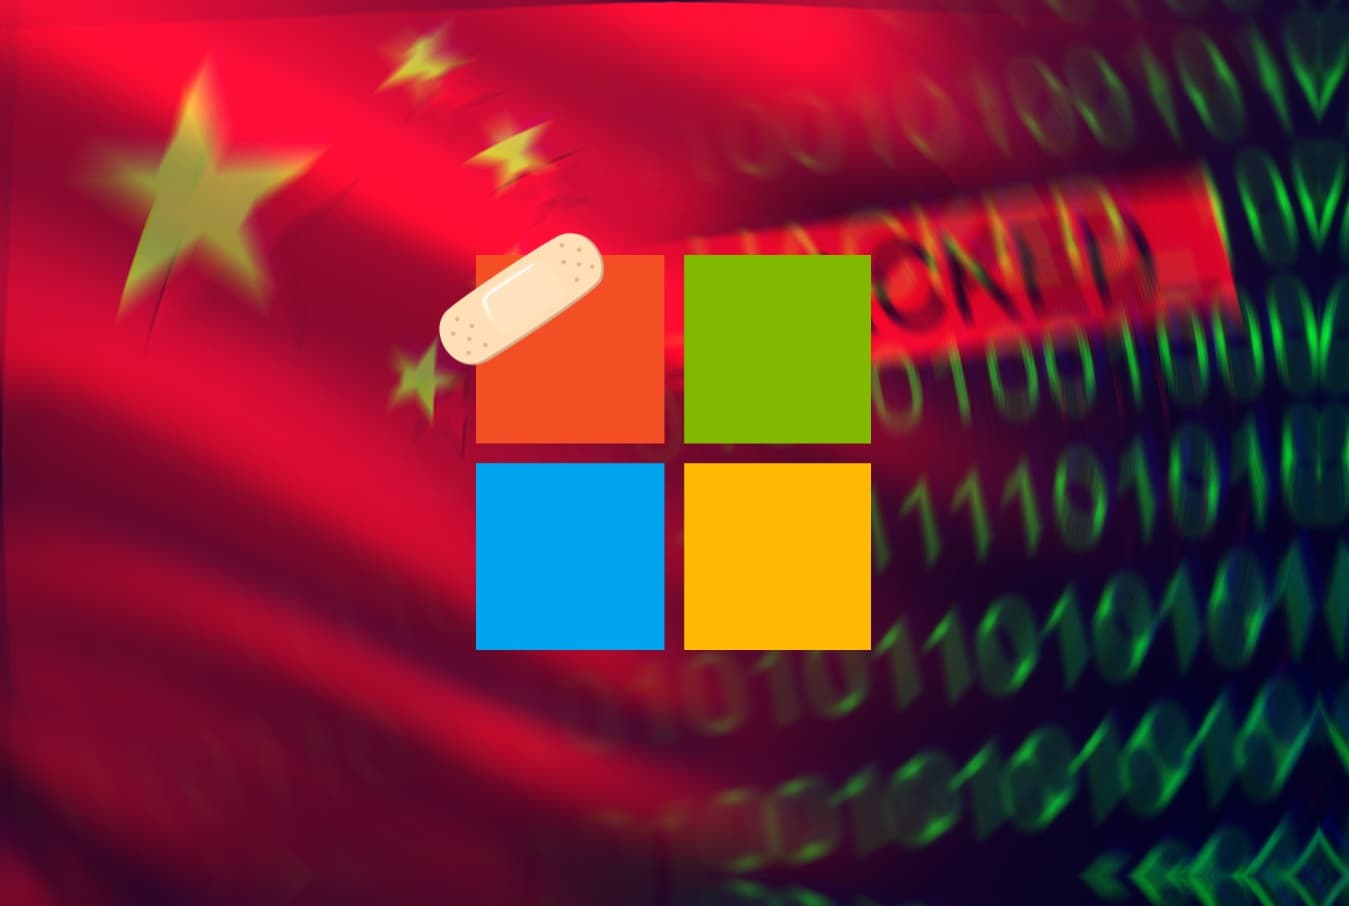 Chinese hackers breached Microsoft Exchange Email servers